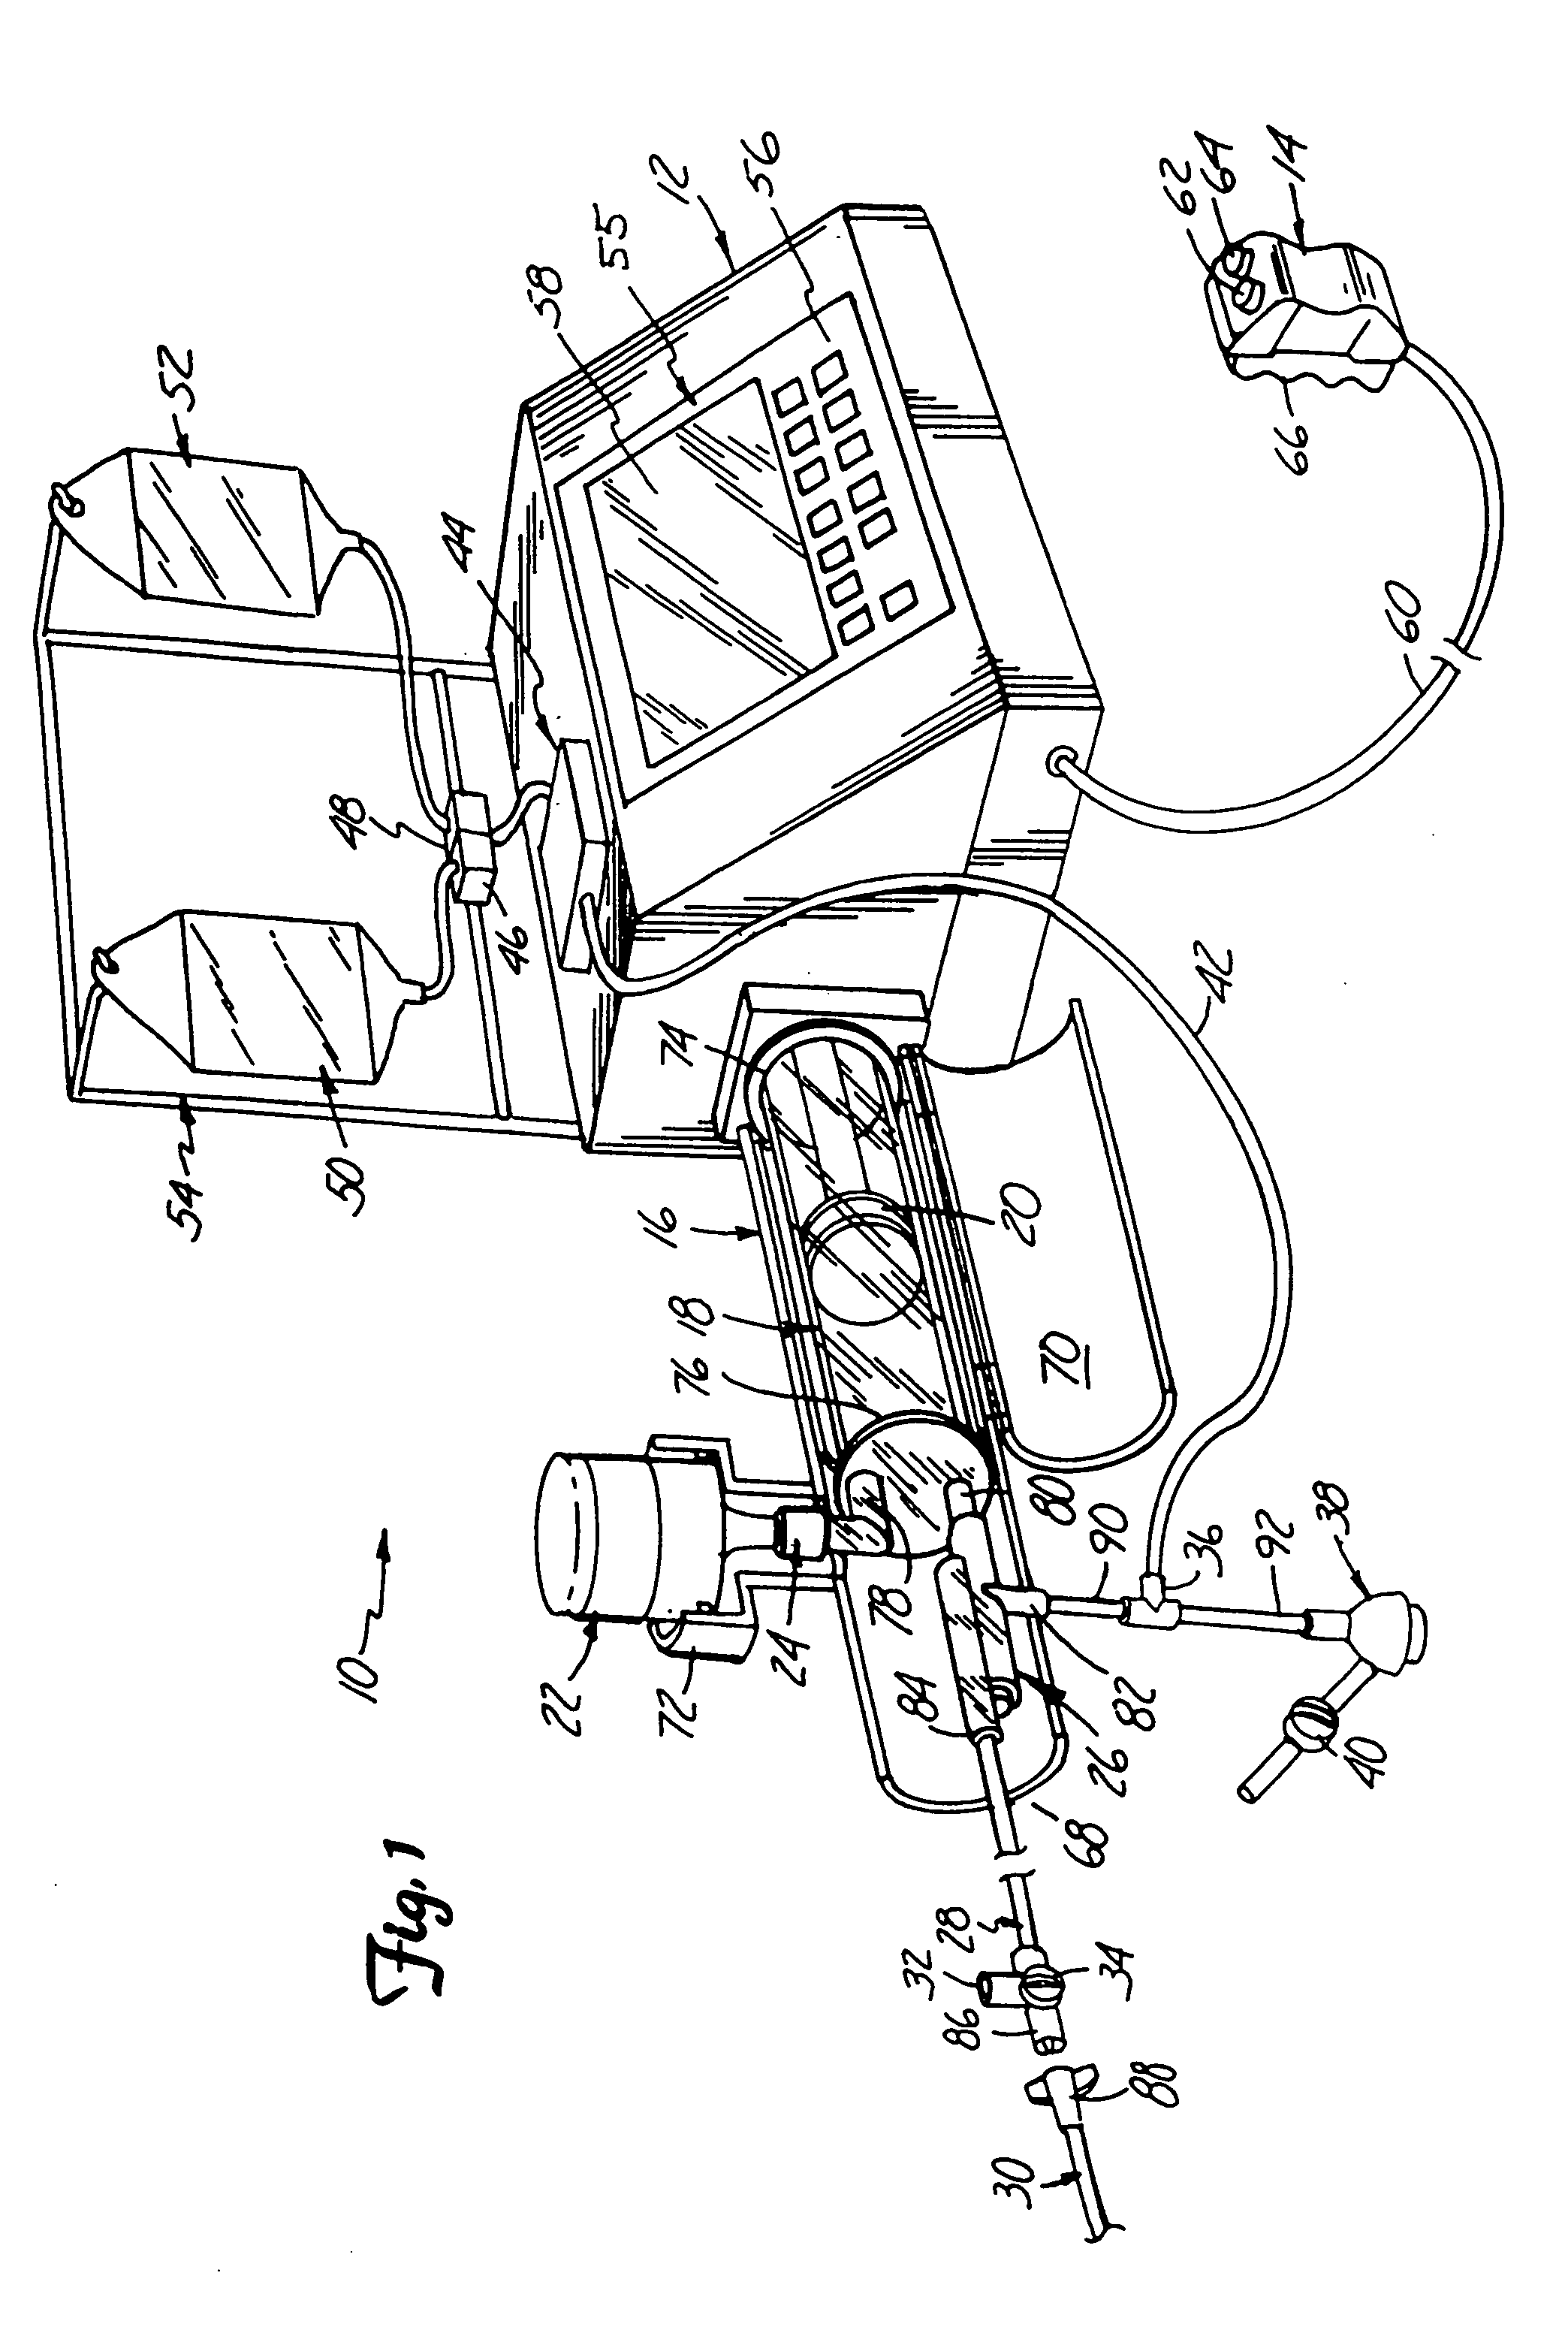 Angiographic injector system with multiple processor redundancy